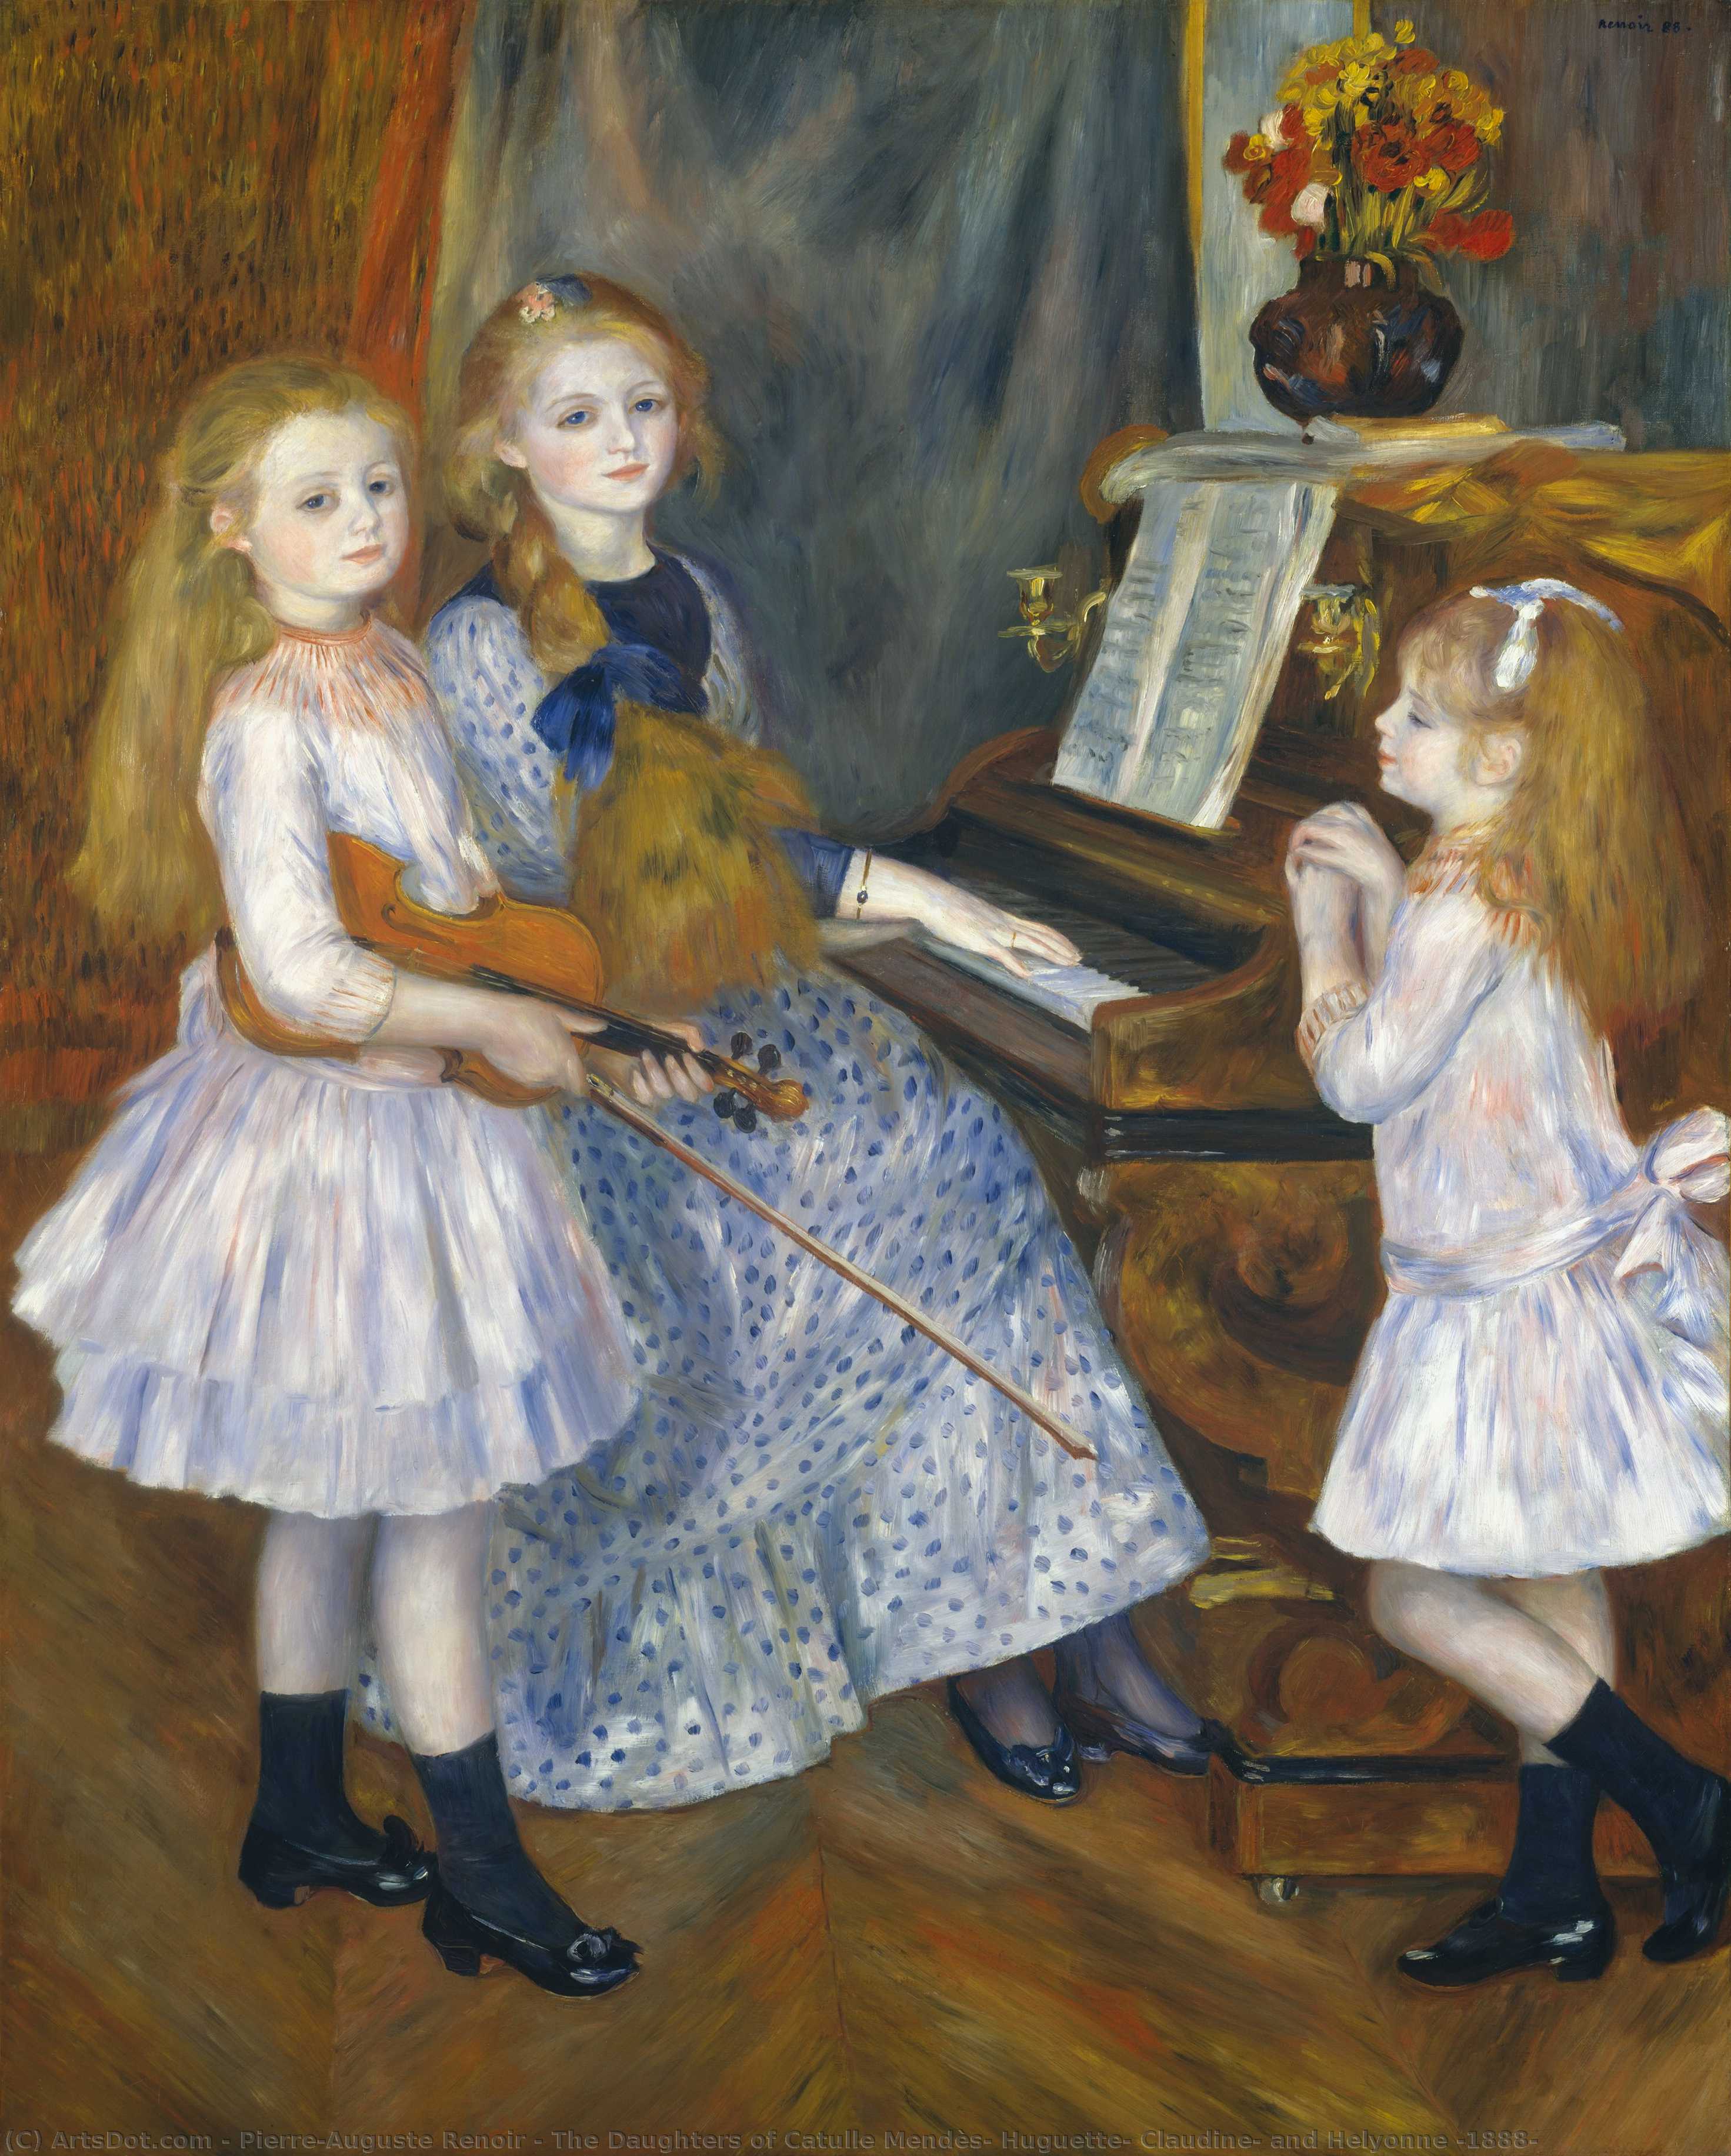 Wikioo.org - สารานุกรมวิจิตรศิลป์ - จิตรกรรม Pierre-Auguste Renoir - The Daughters of Catulle Mendès, Huguette, Claudine, and Helyonne (1888)